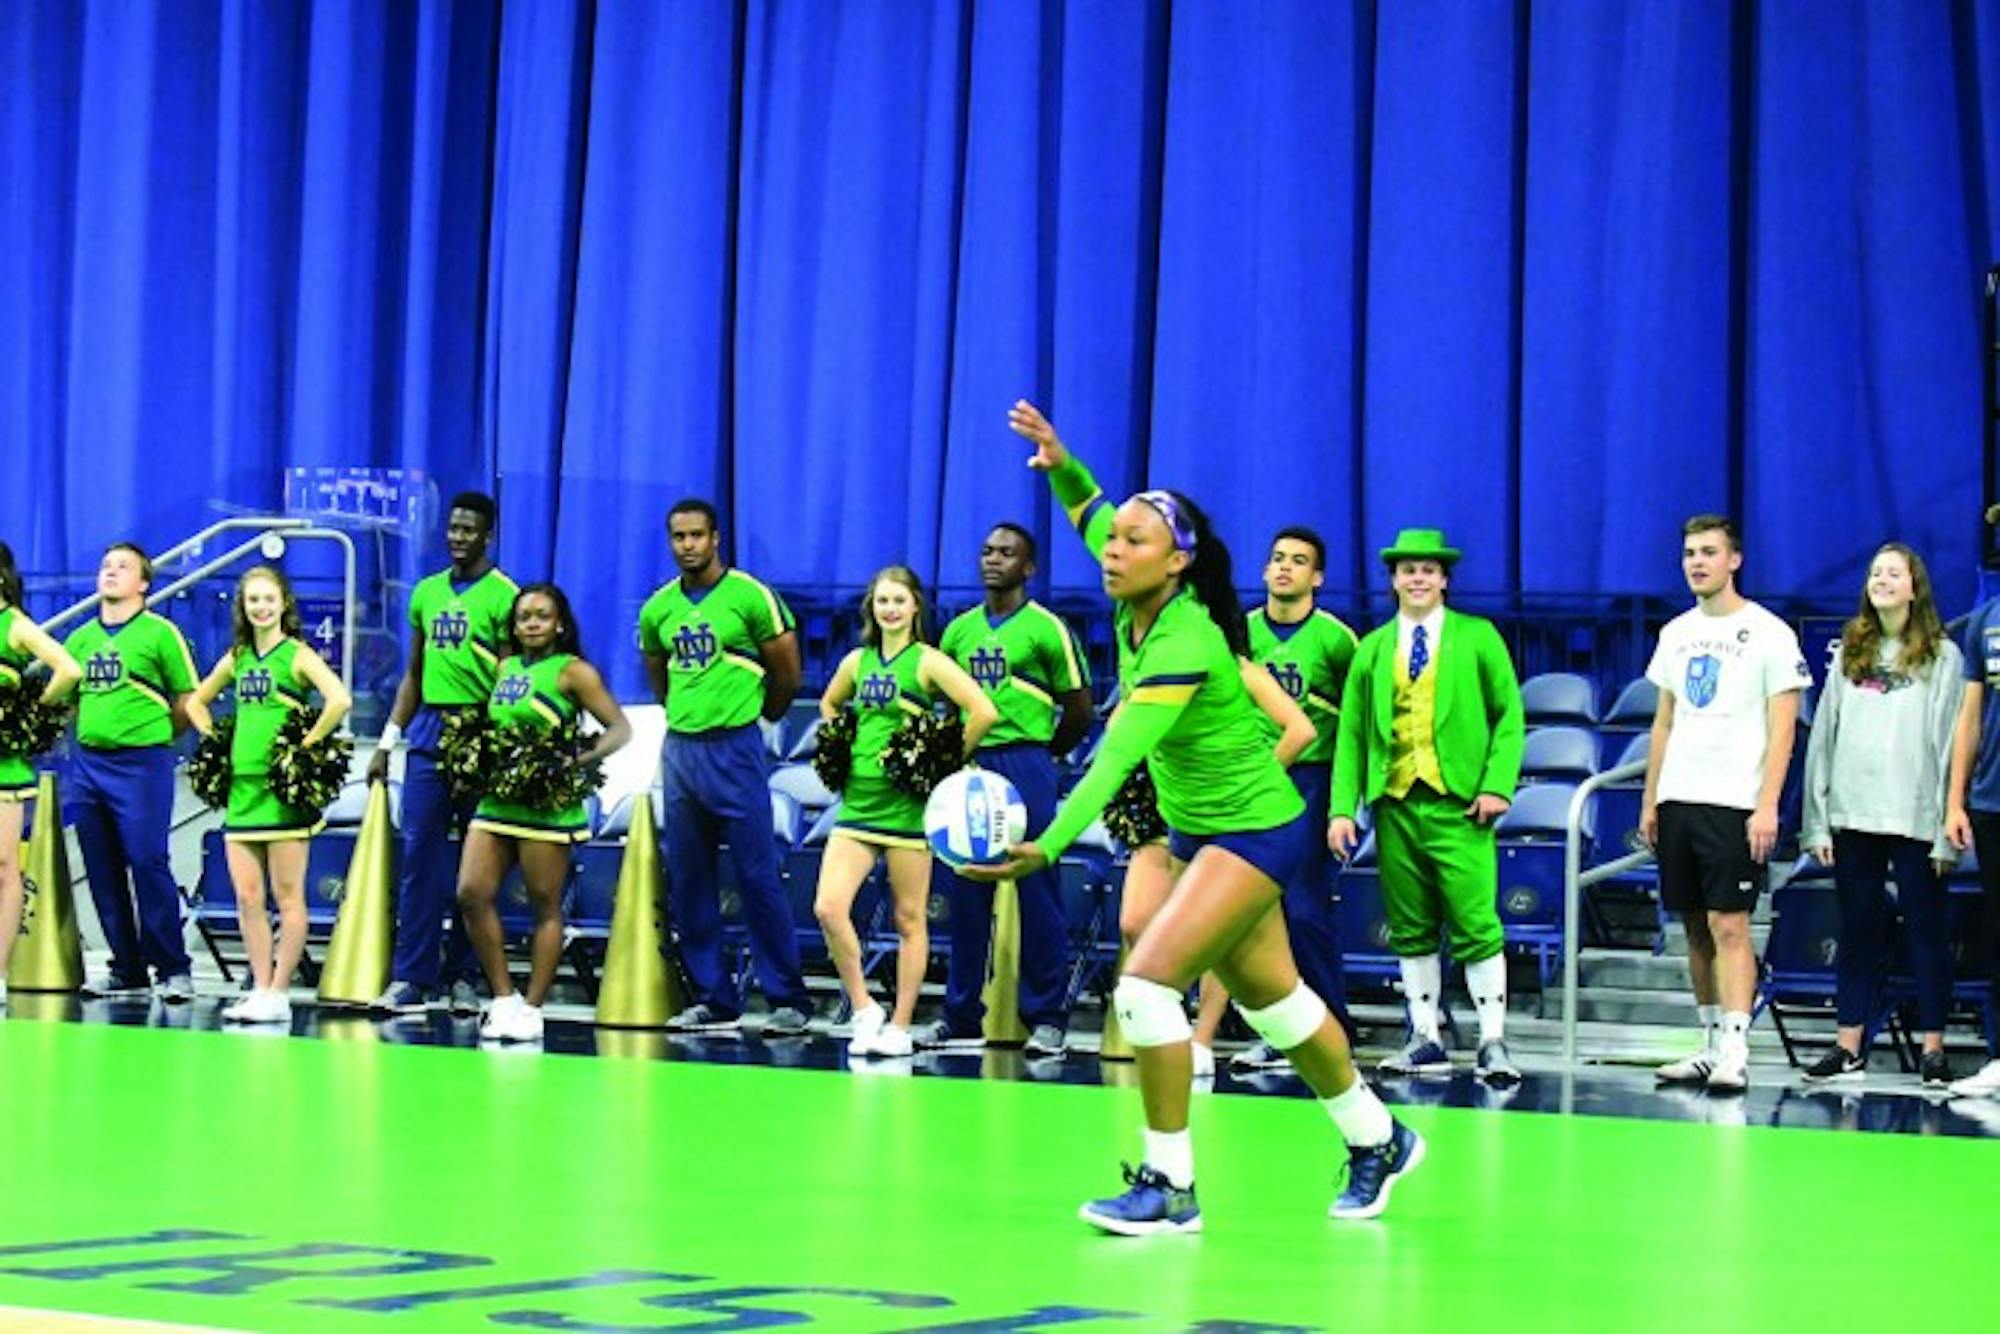 Irish sophomore outside hitter Jemma Yeadon prepares to serve the ball during Notre Dame’s 3-0 win over Michigan State on Sept. 15 at Purcell Pavilion. Yeadon had 19 kills and 11 digs in the match.